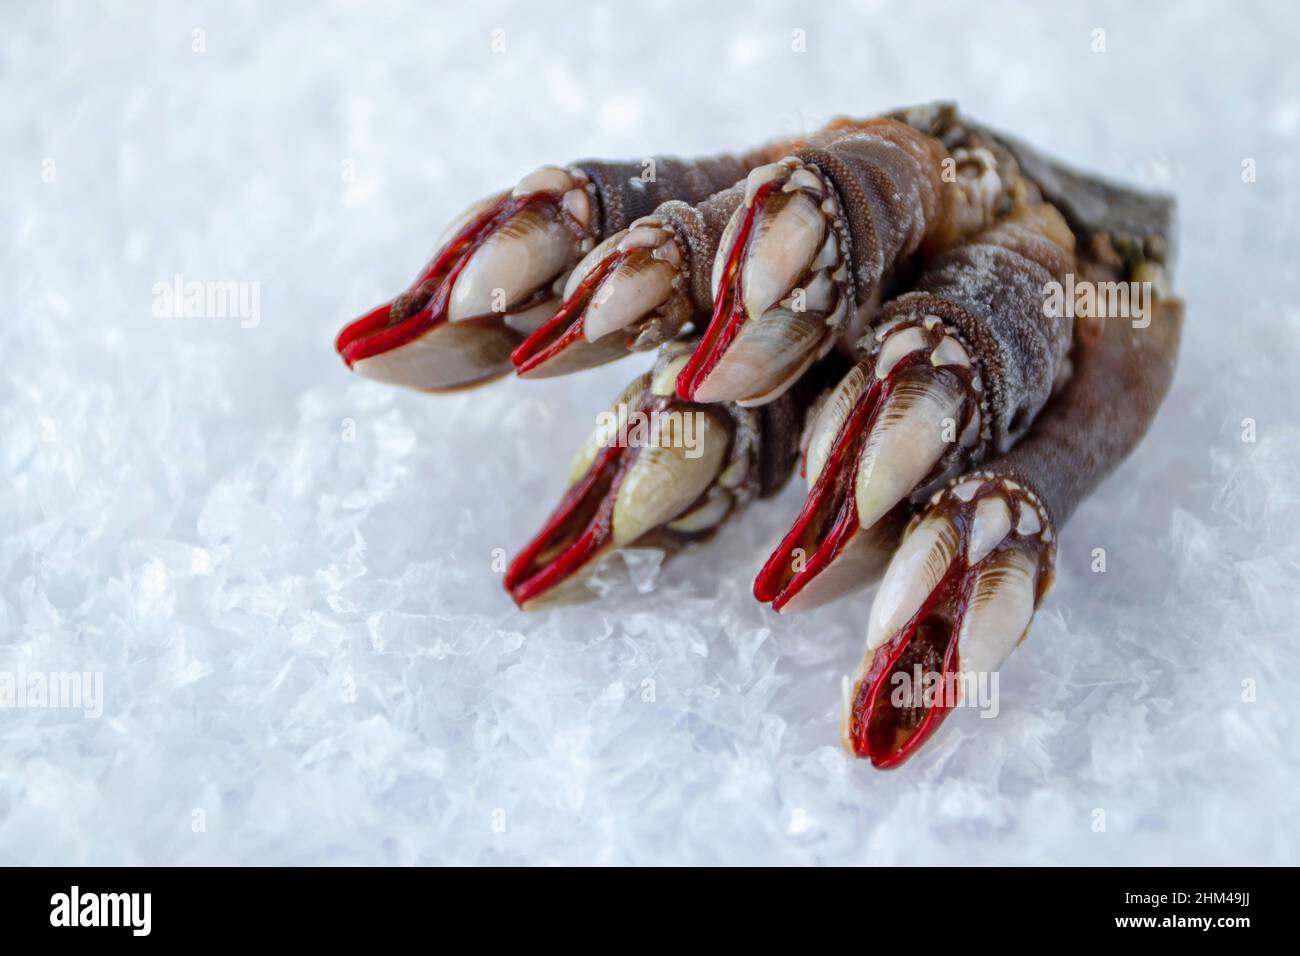 Goose neck barnacle or leaf barnacle seafood bunch on the ice.Pollicipes pollicipes Stock Photo